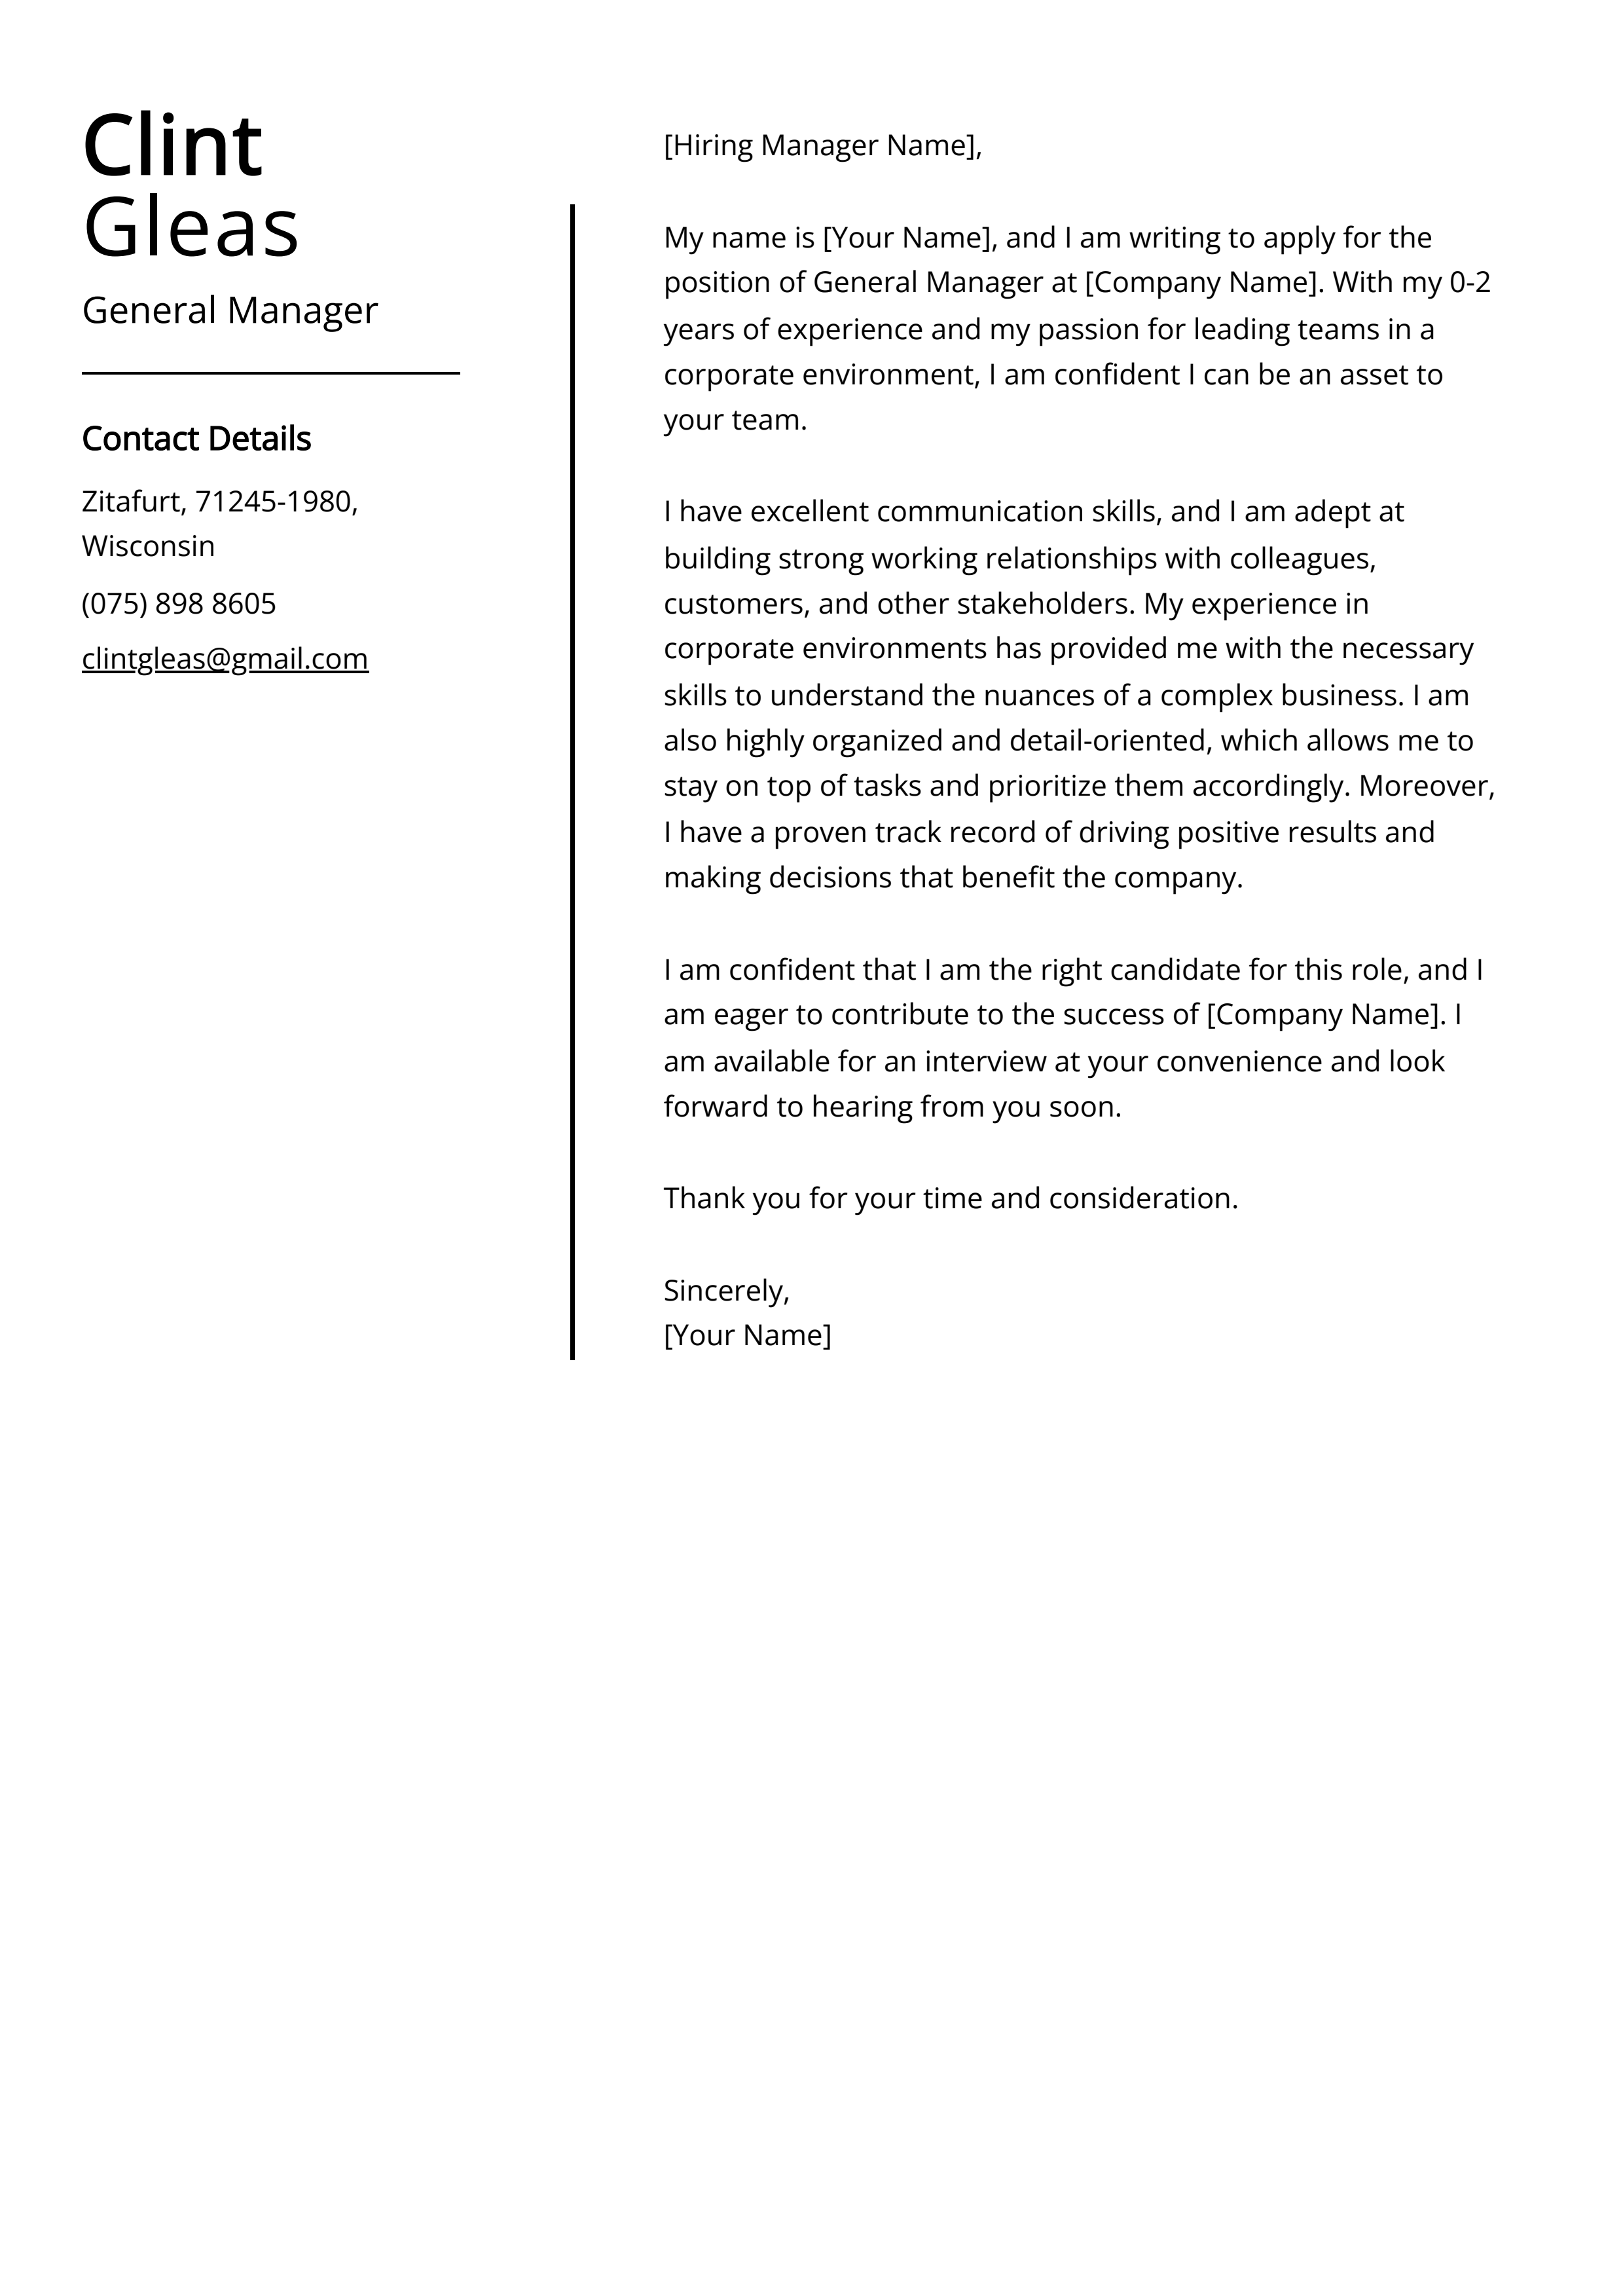 General Manager Cover Letter Example